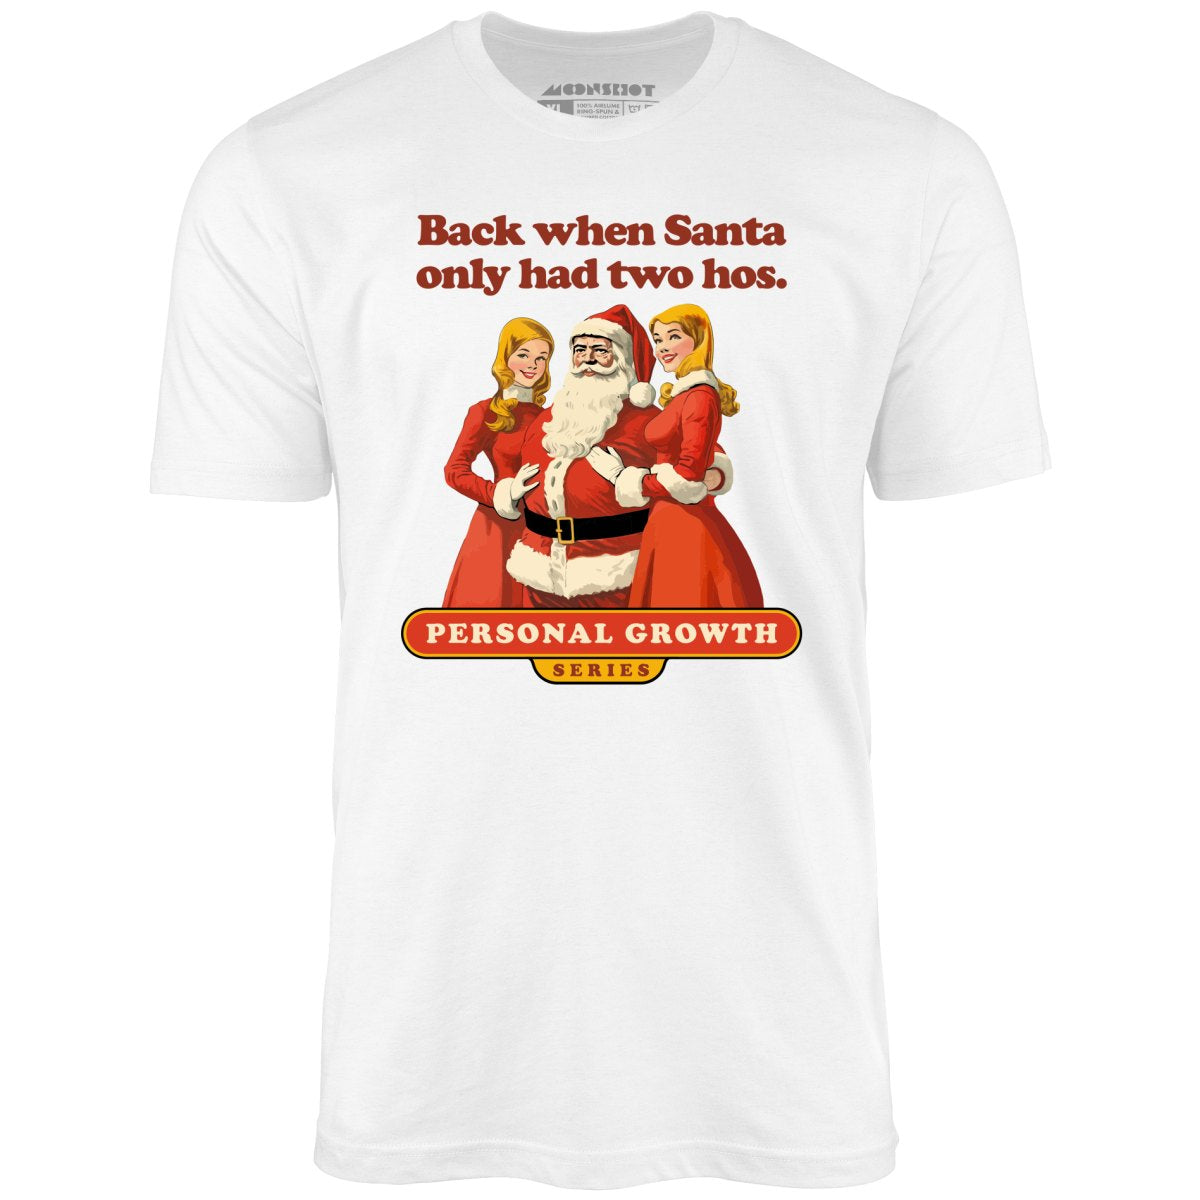 Back When Santa Only Had Two Hos - Unisex T-Shirt